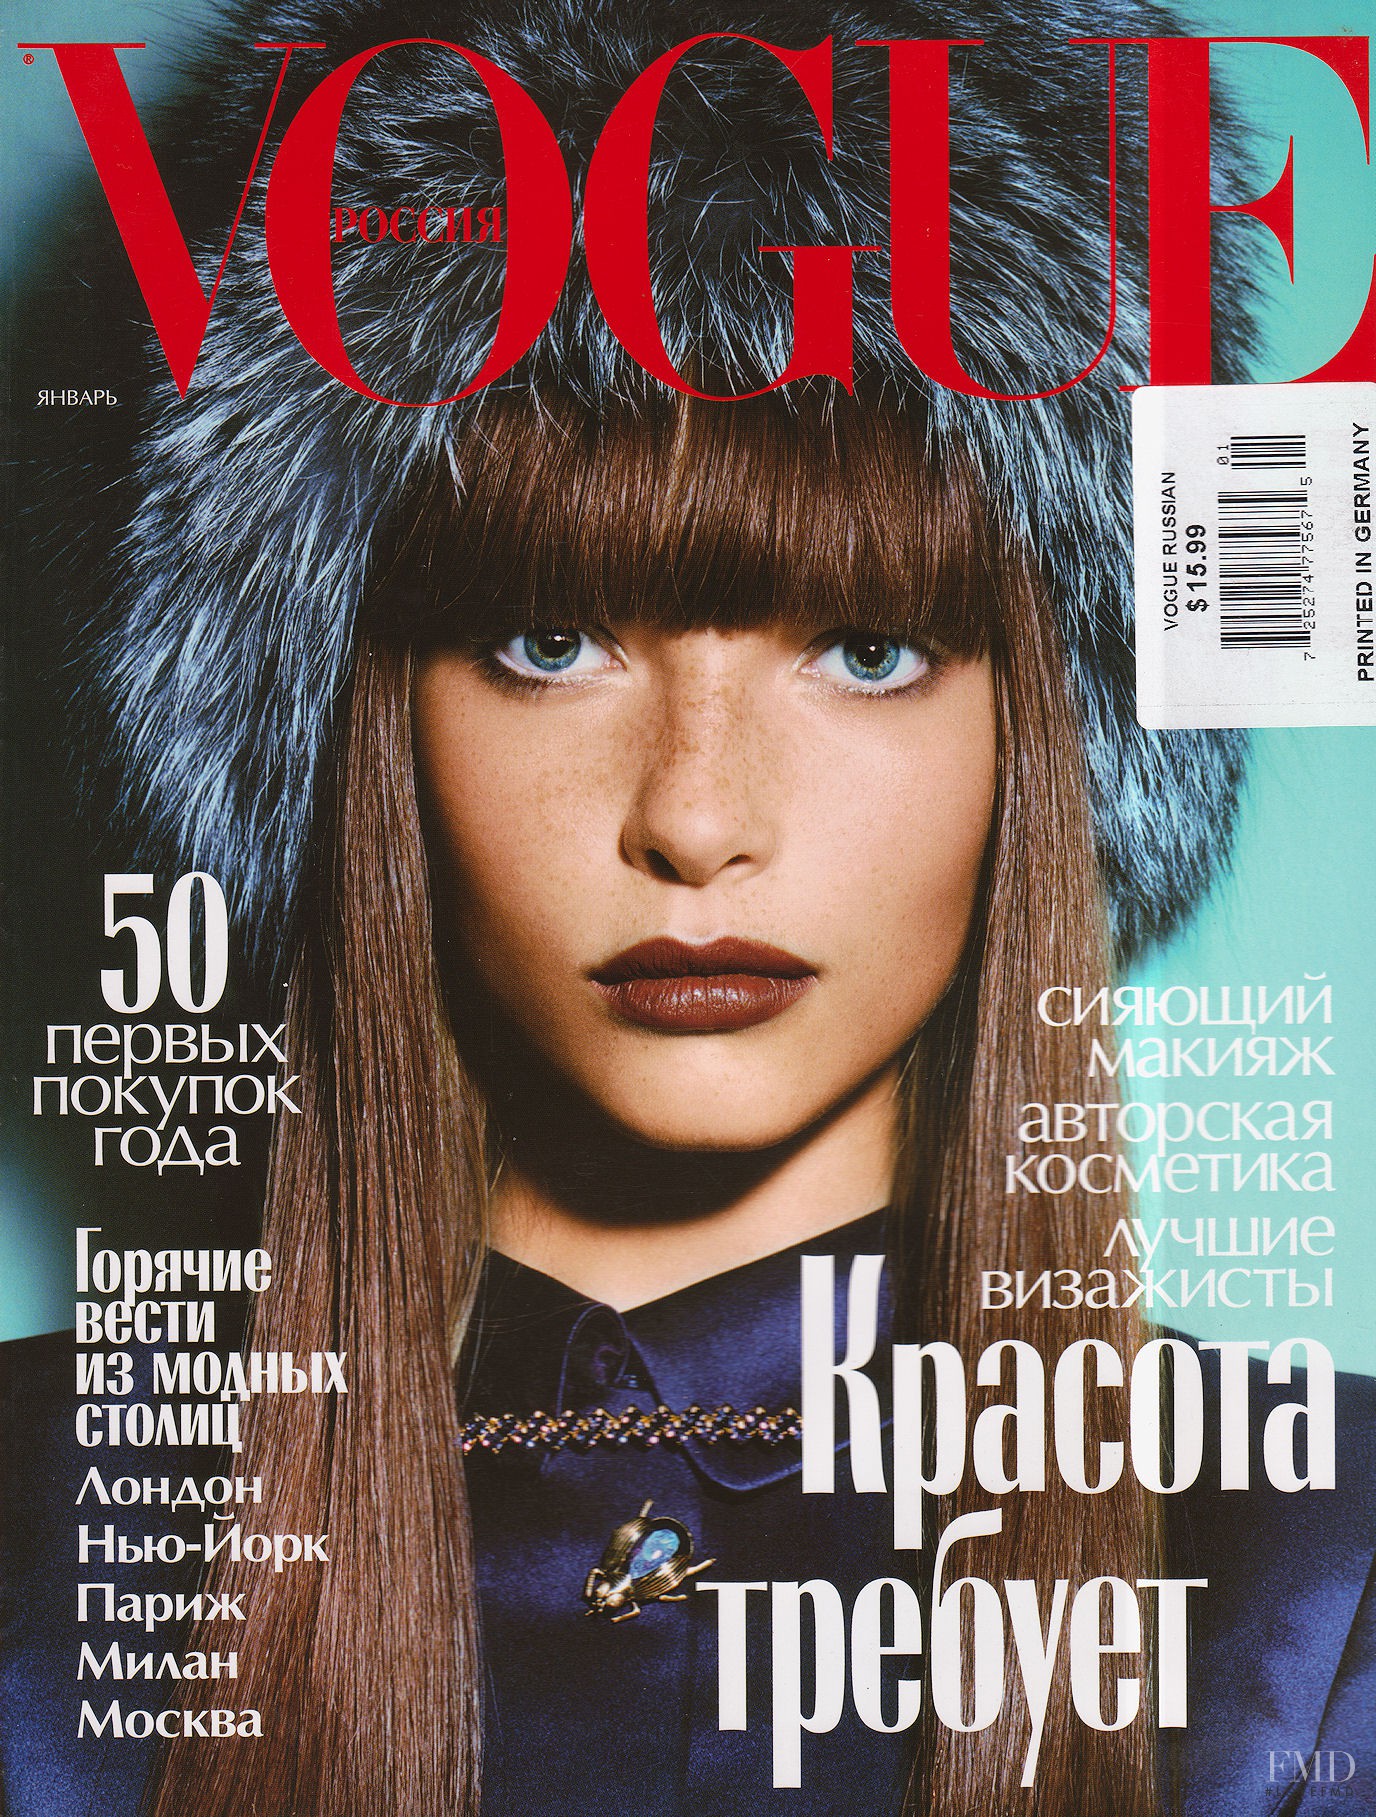 Cover of Vogue Russia with Polina Kouklina, January 2005 (ID:31718 ...